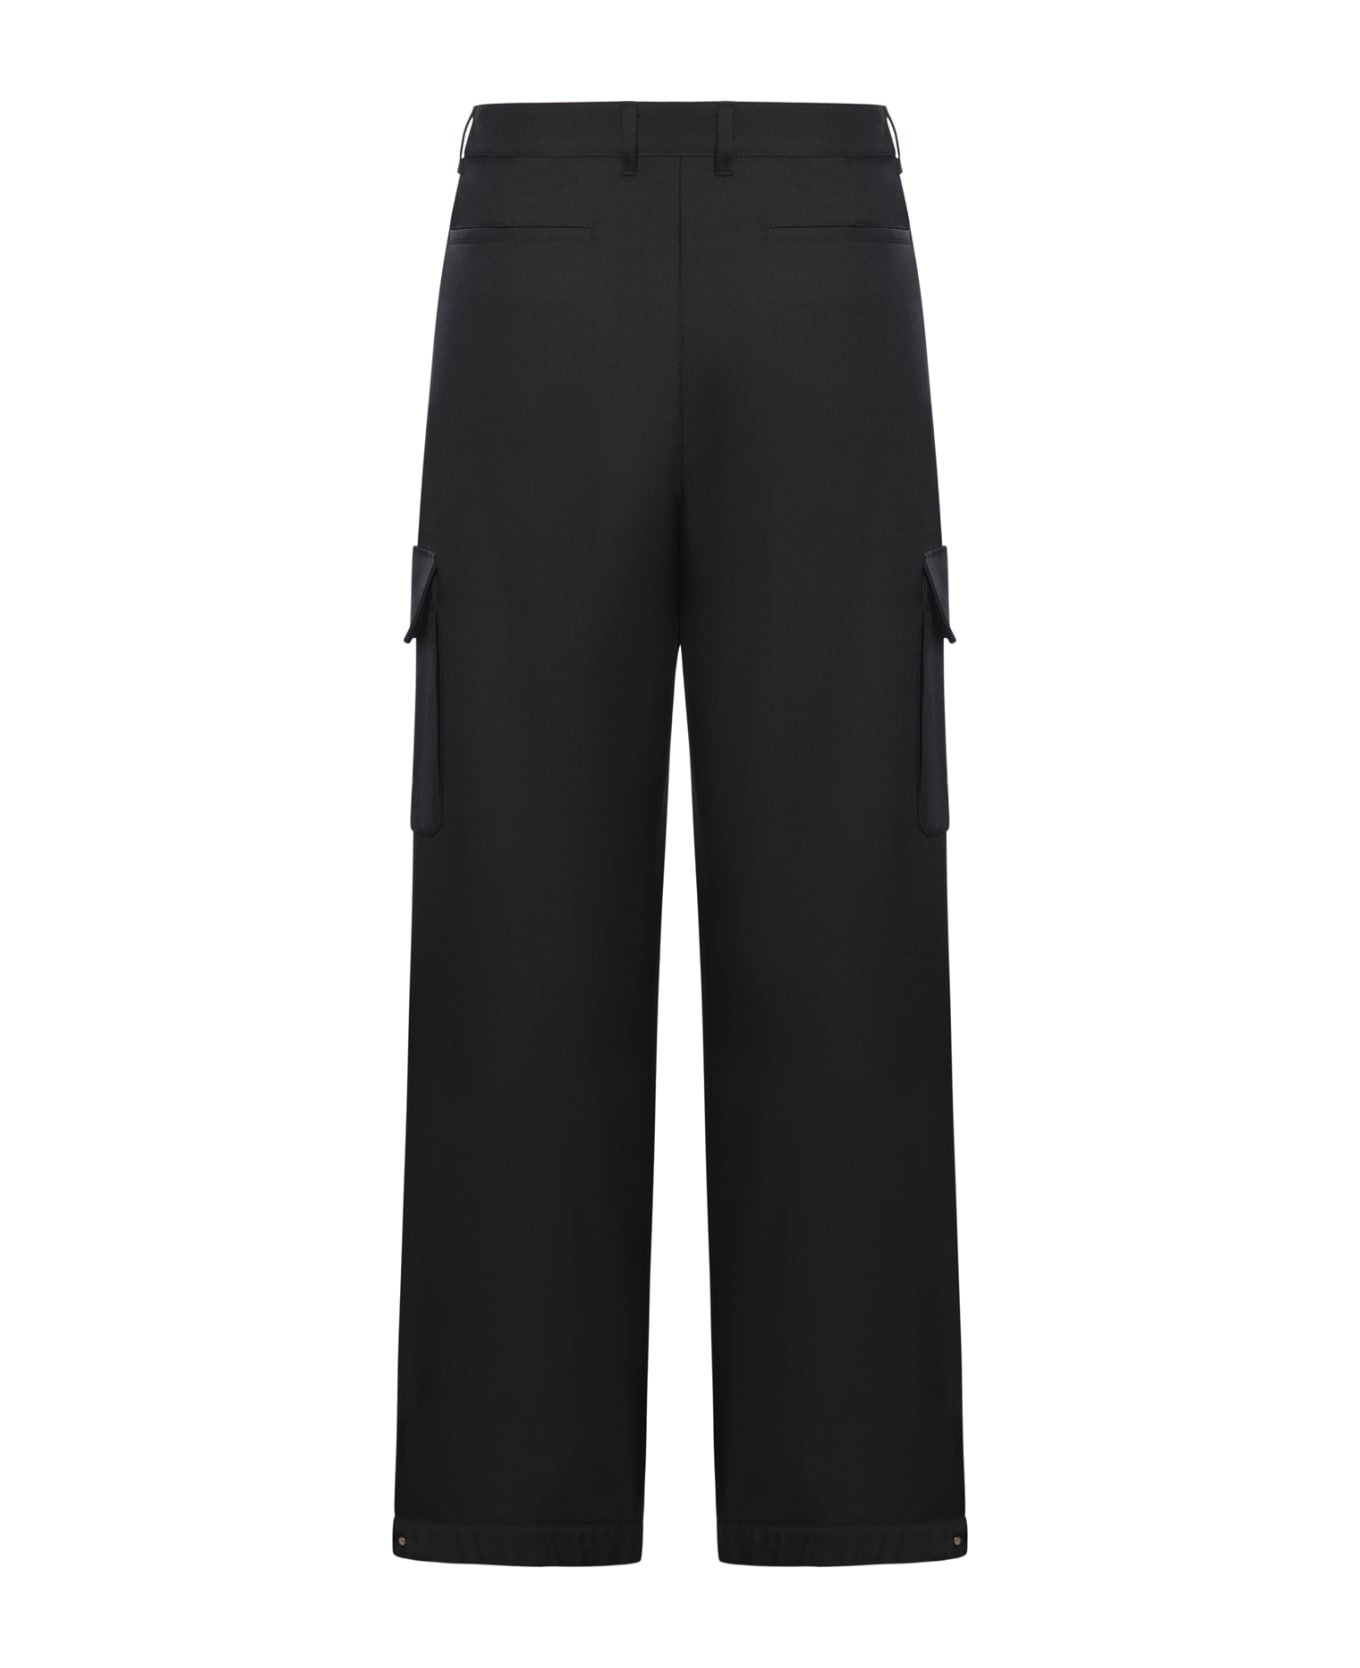 Off-White Ow Emb Drill Cargo Pant - Black